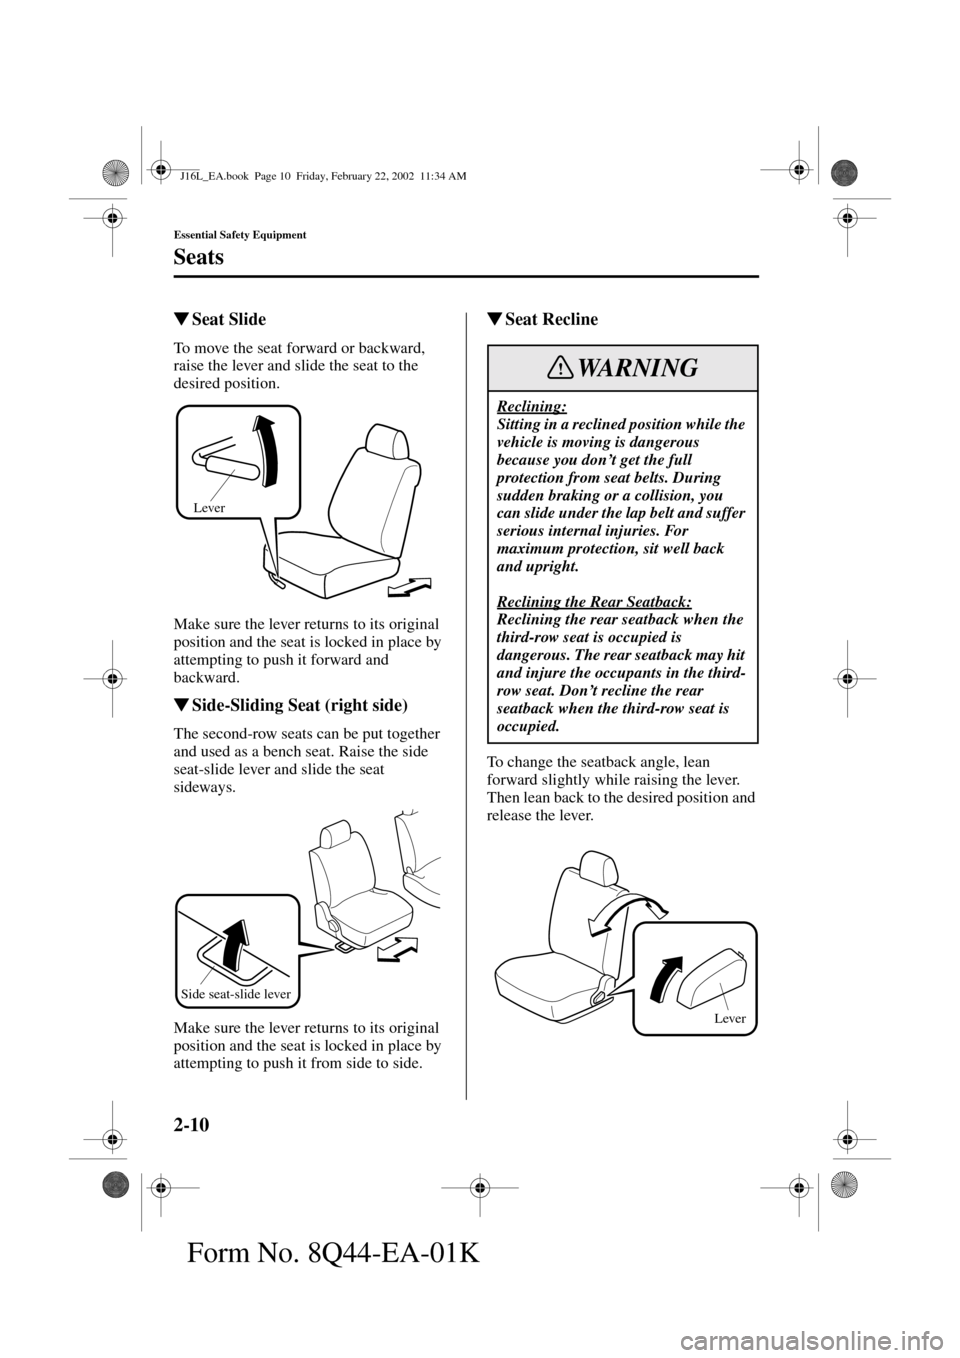 MAZDA MODEL MPV 2002  Owners Manual (in English) 2-10
Essential Safety Equipment
Seats
Form No. 8Q44-EA-01K
Seat Slide
To move the seat forward or backward, 
raise the lever and slide the seat to the 
desired position.
Make sure the lever returns t